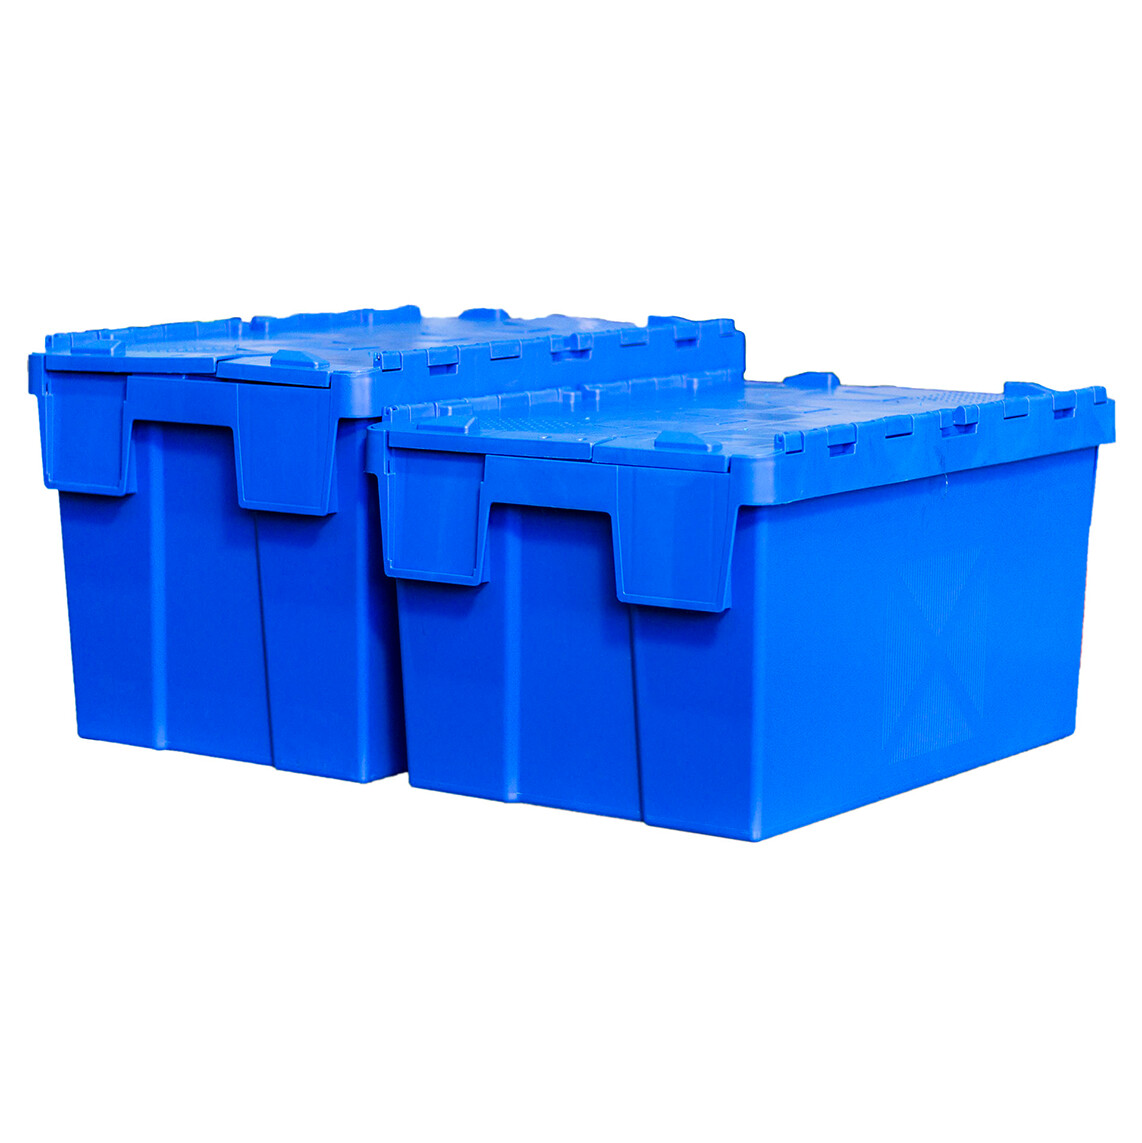 SECURITY CONTAINER COLOUR 400 X 297 X 315MM